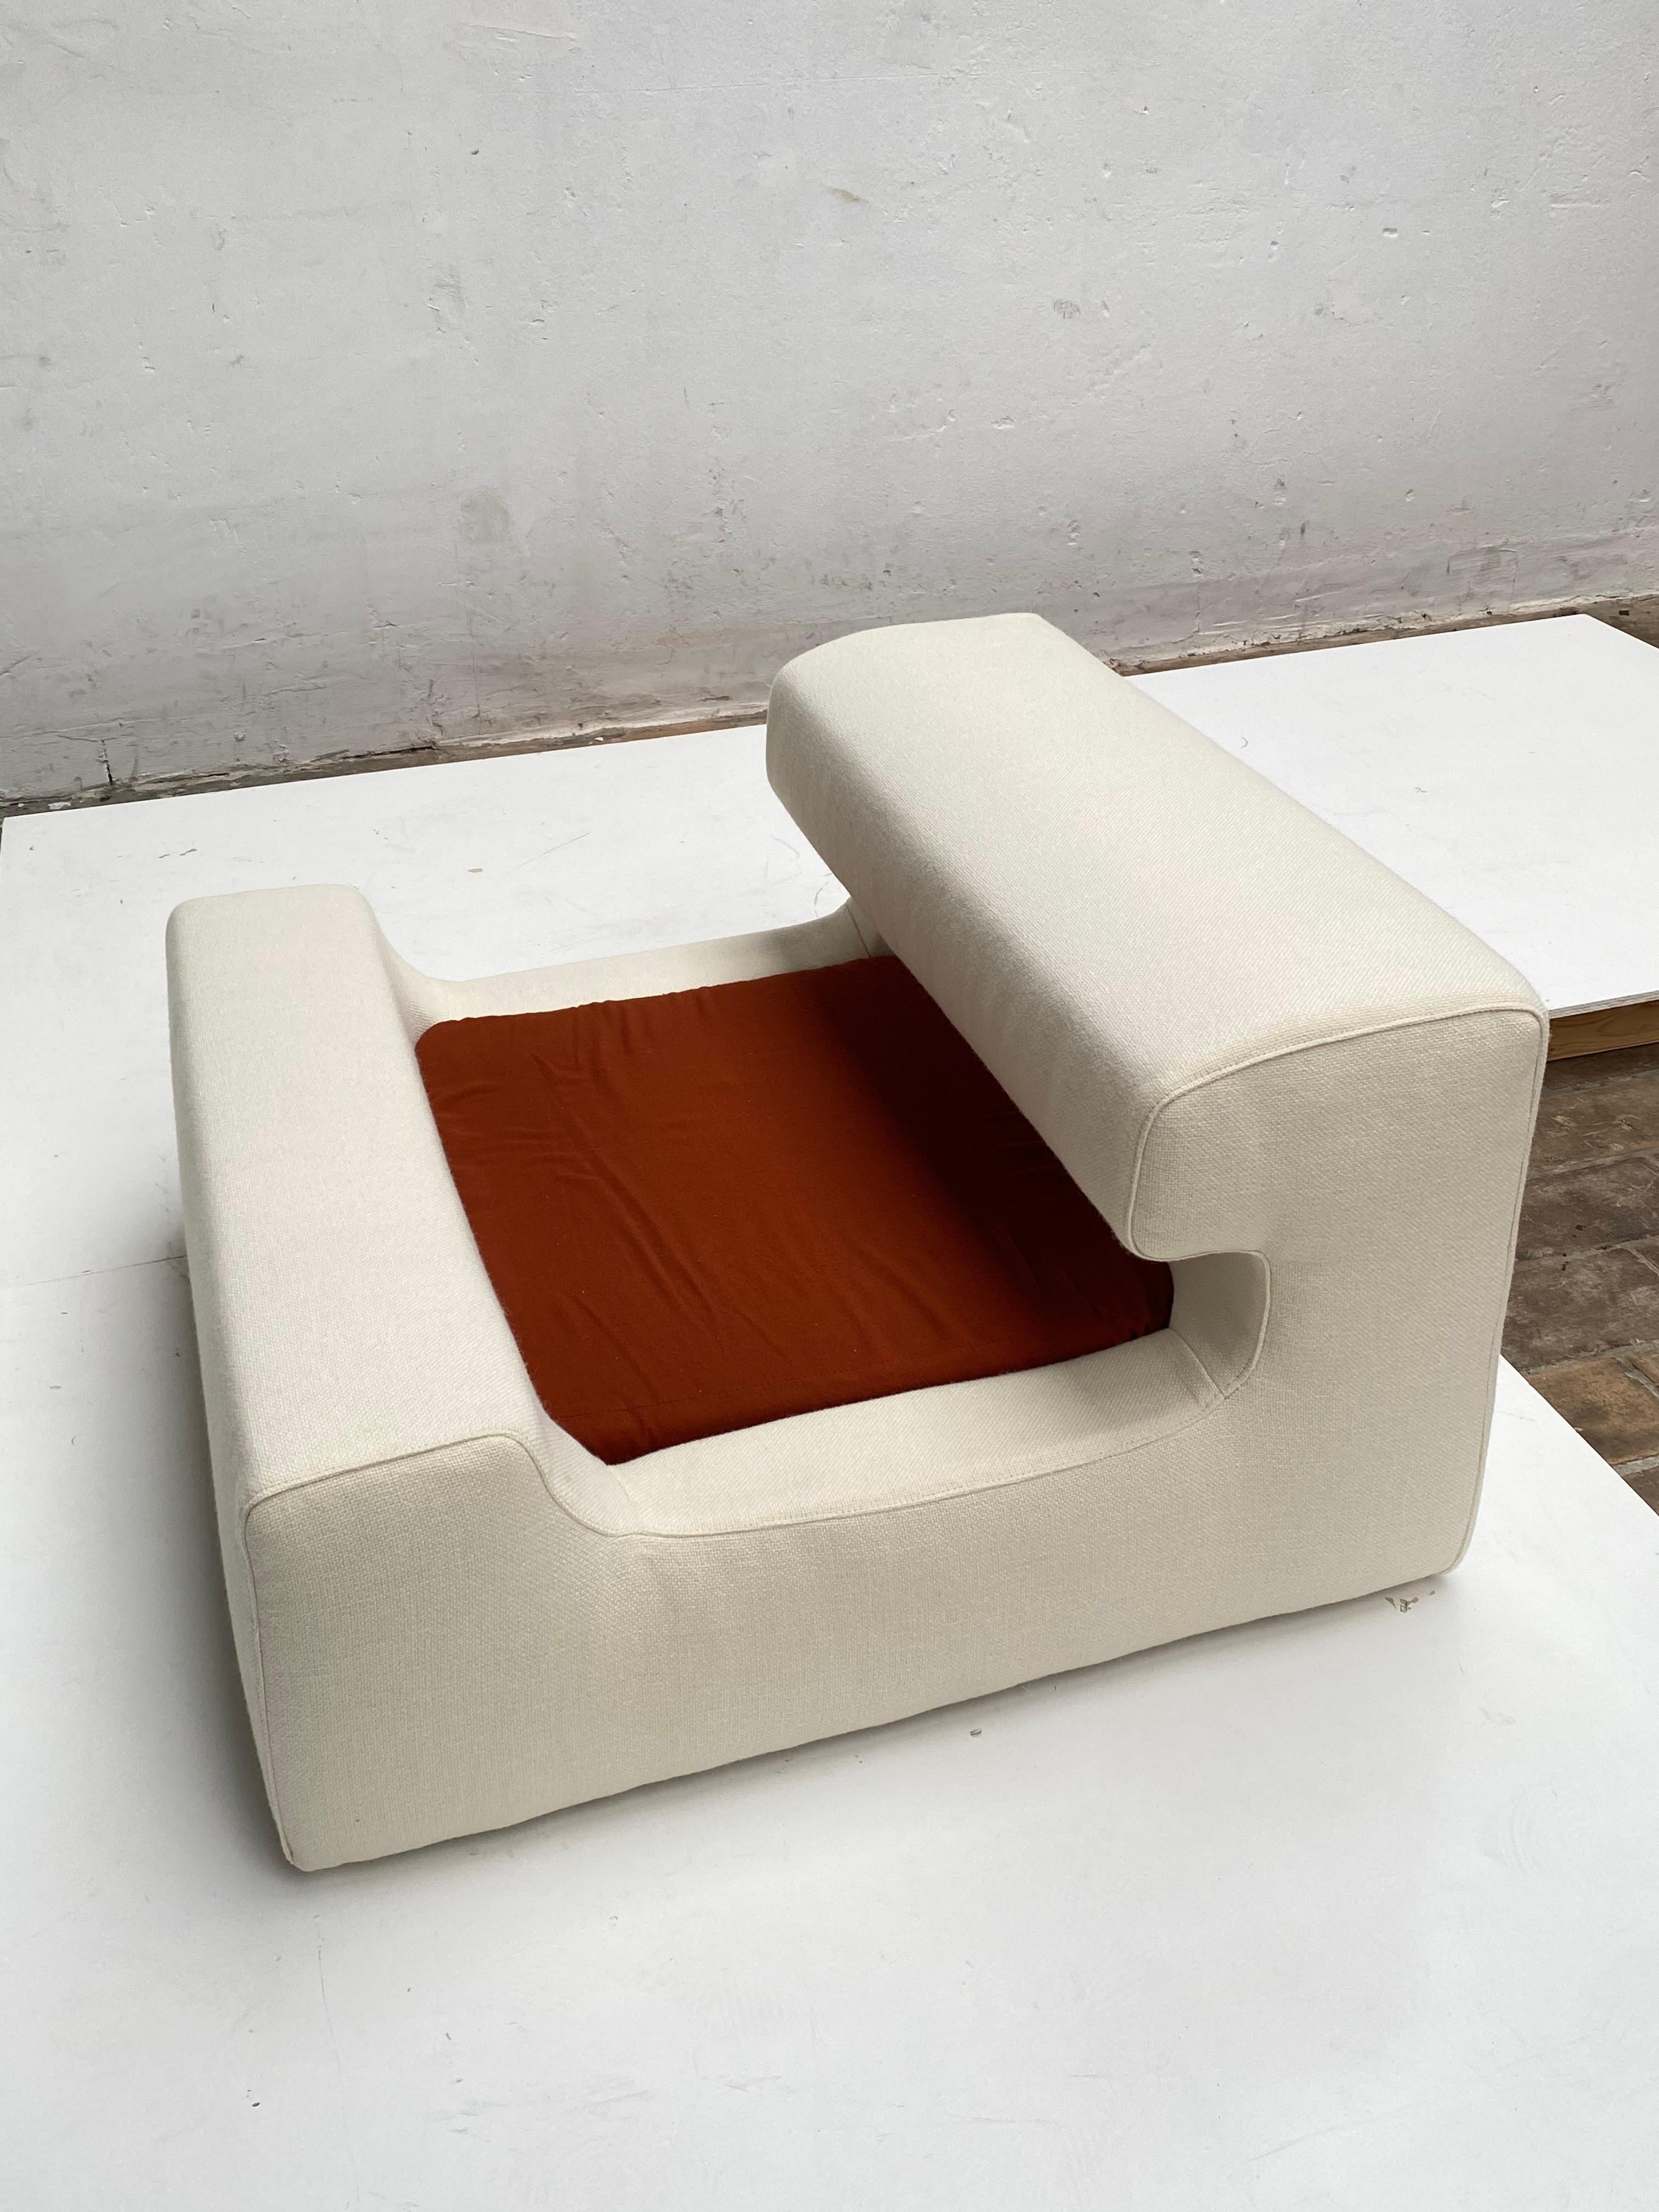 Steel Extremely Rare Lounge Chairs Designed by Mangiarotti for the 'Casa Vitale' 1969  For Sale